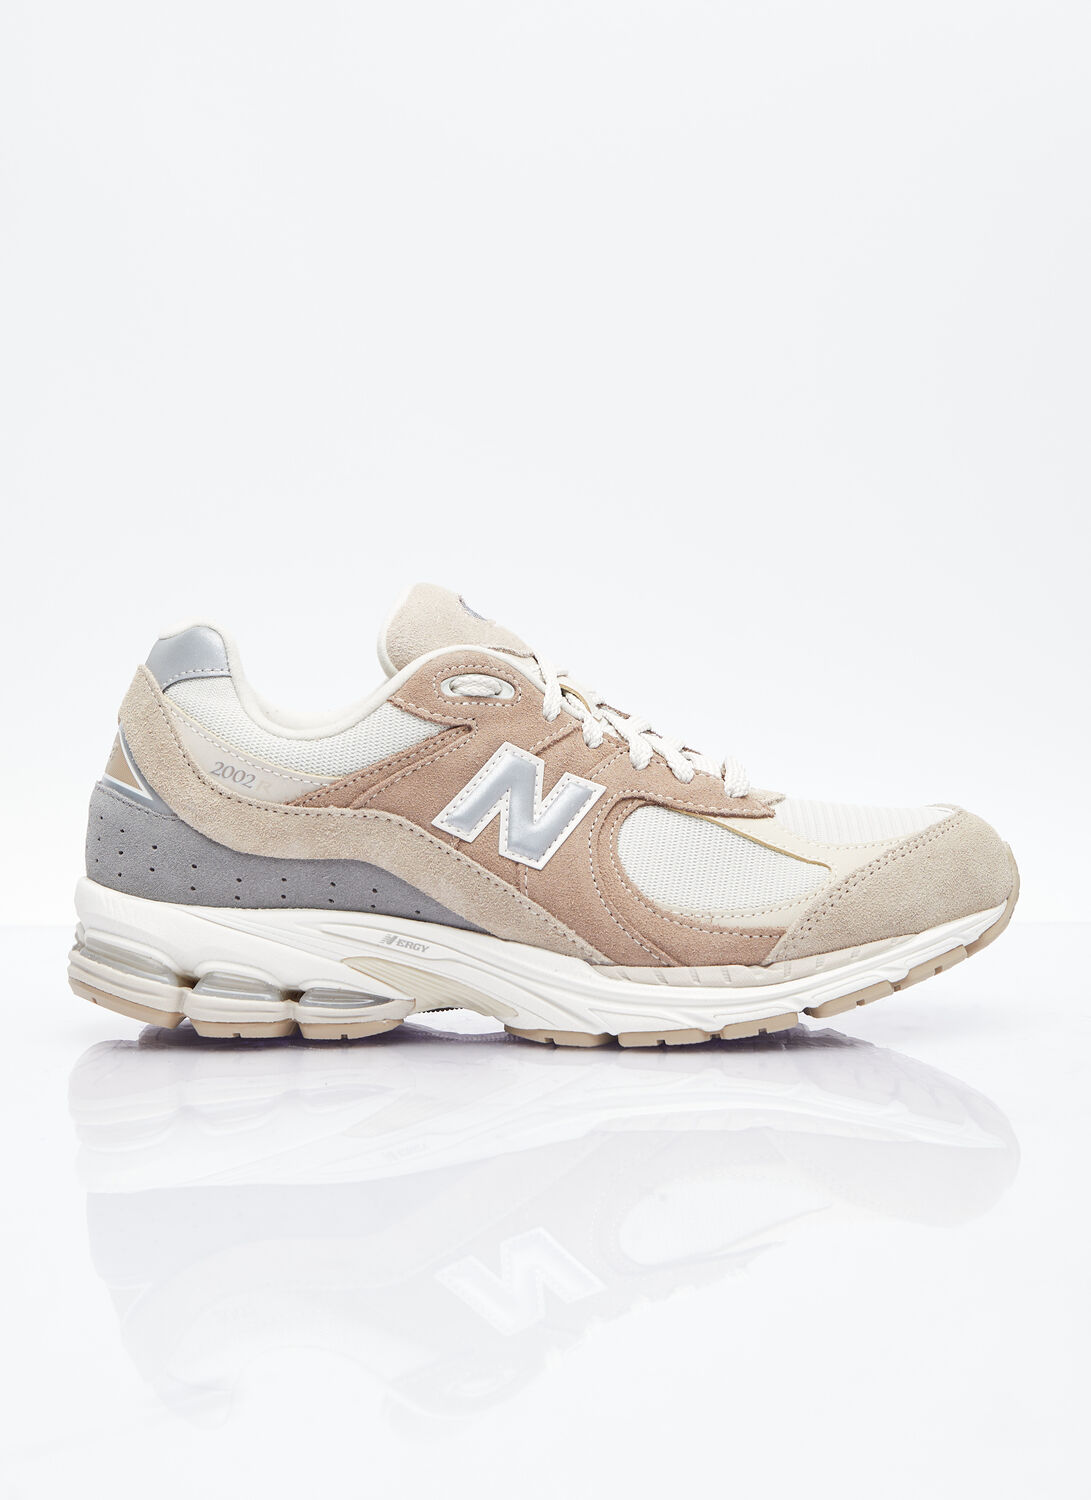 New Balance 2002r Sneaker In Off White/grey/white